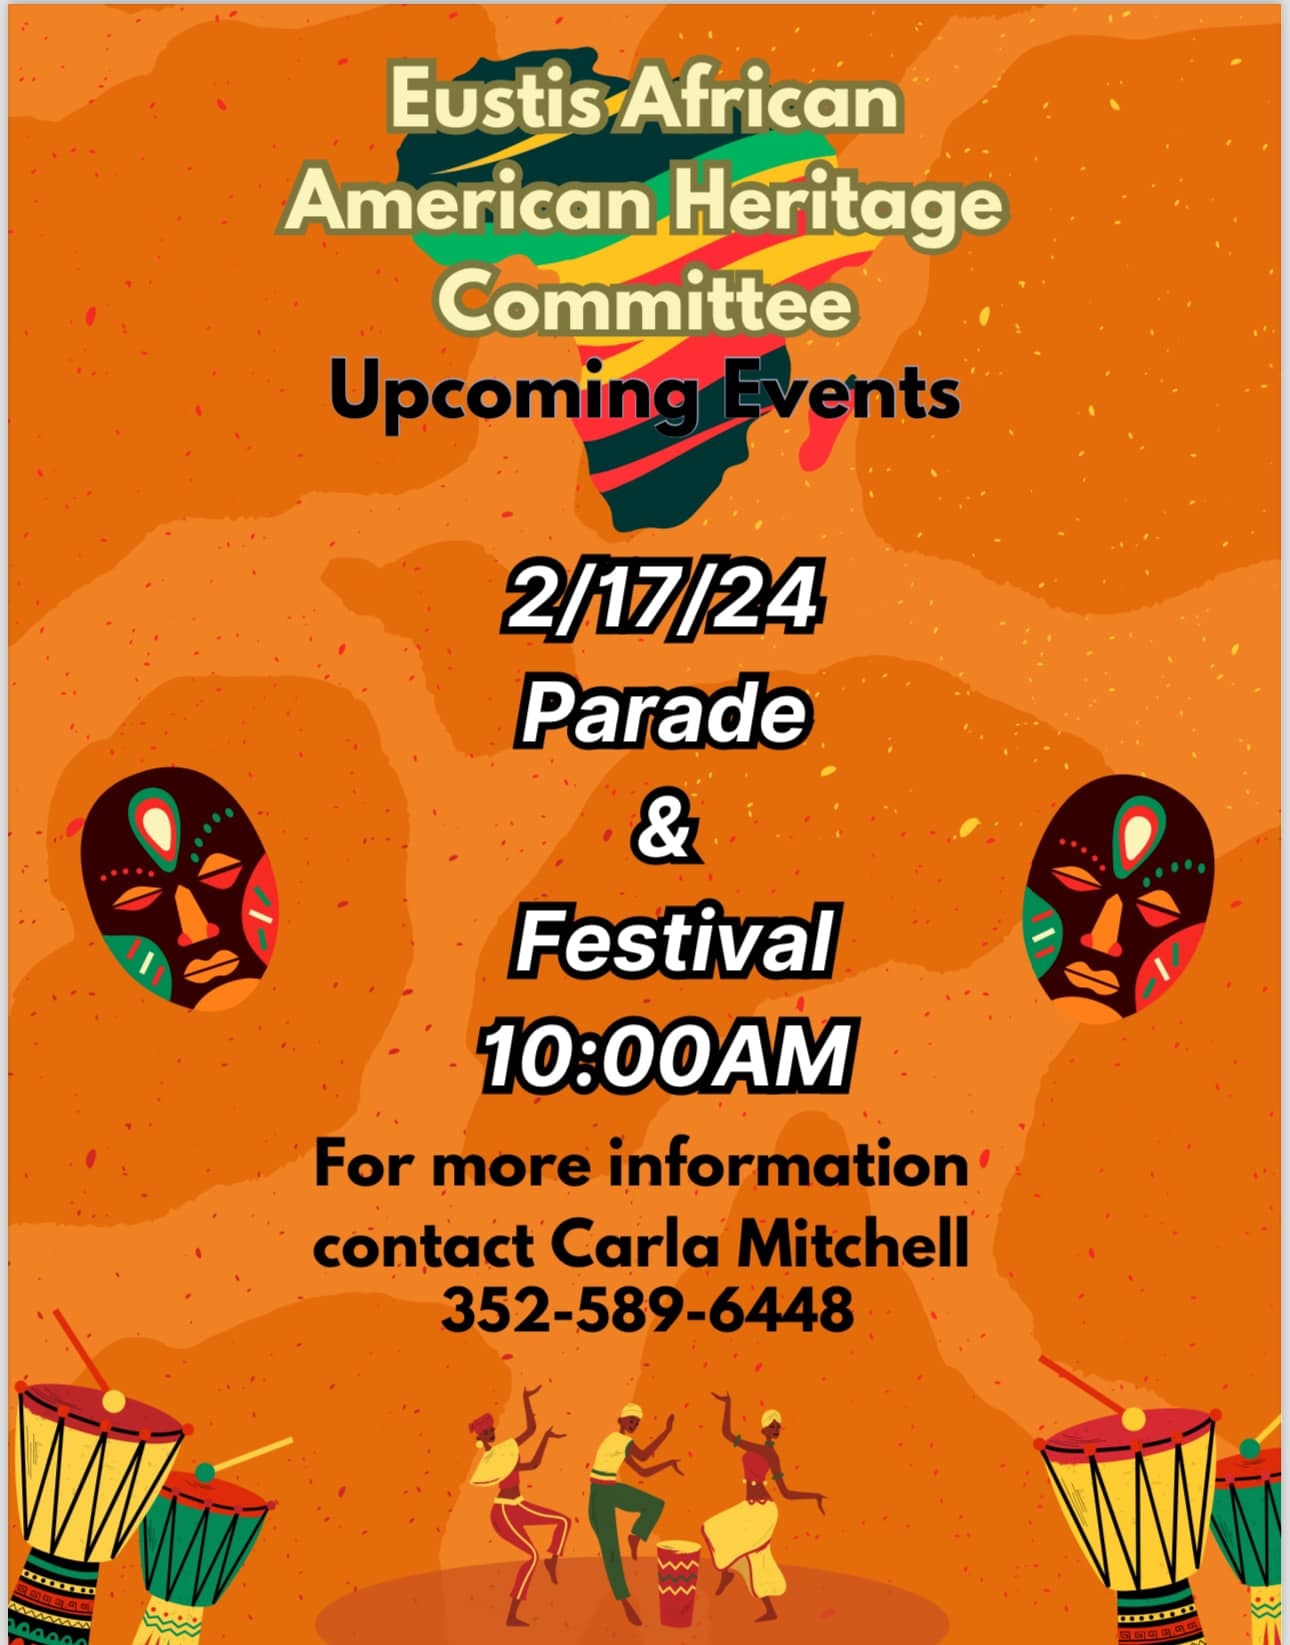 Eustis African American Heritage Committee hosts Parade and Festival on Feb. 2 2024 at 10:00 AM